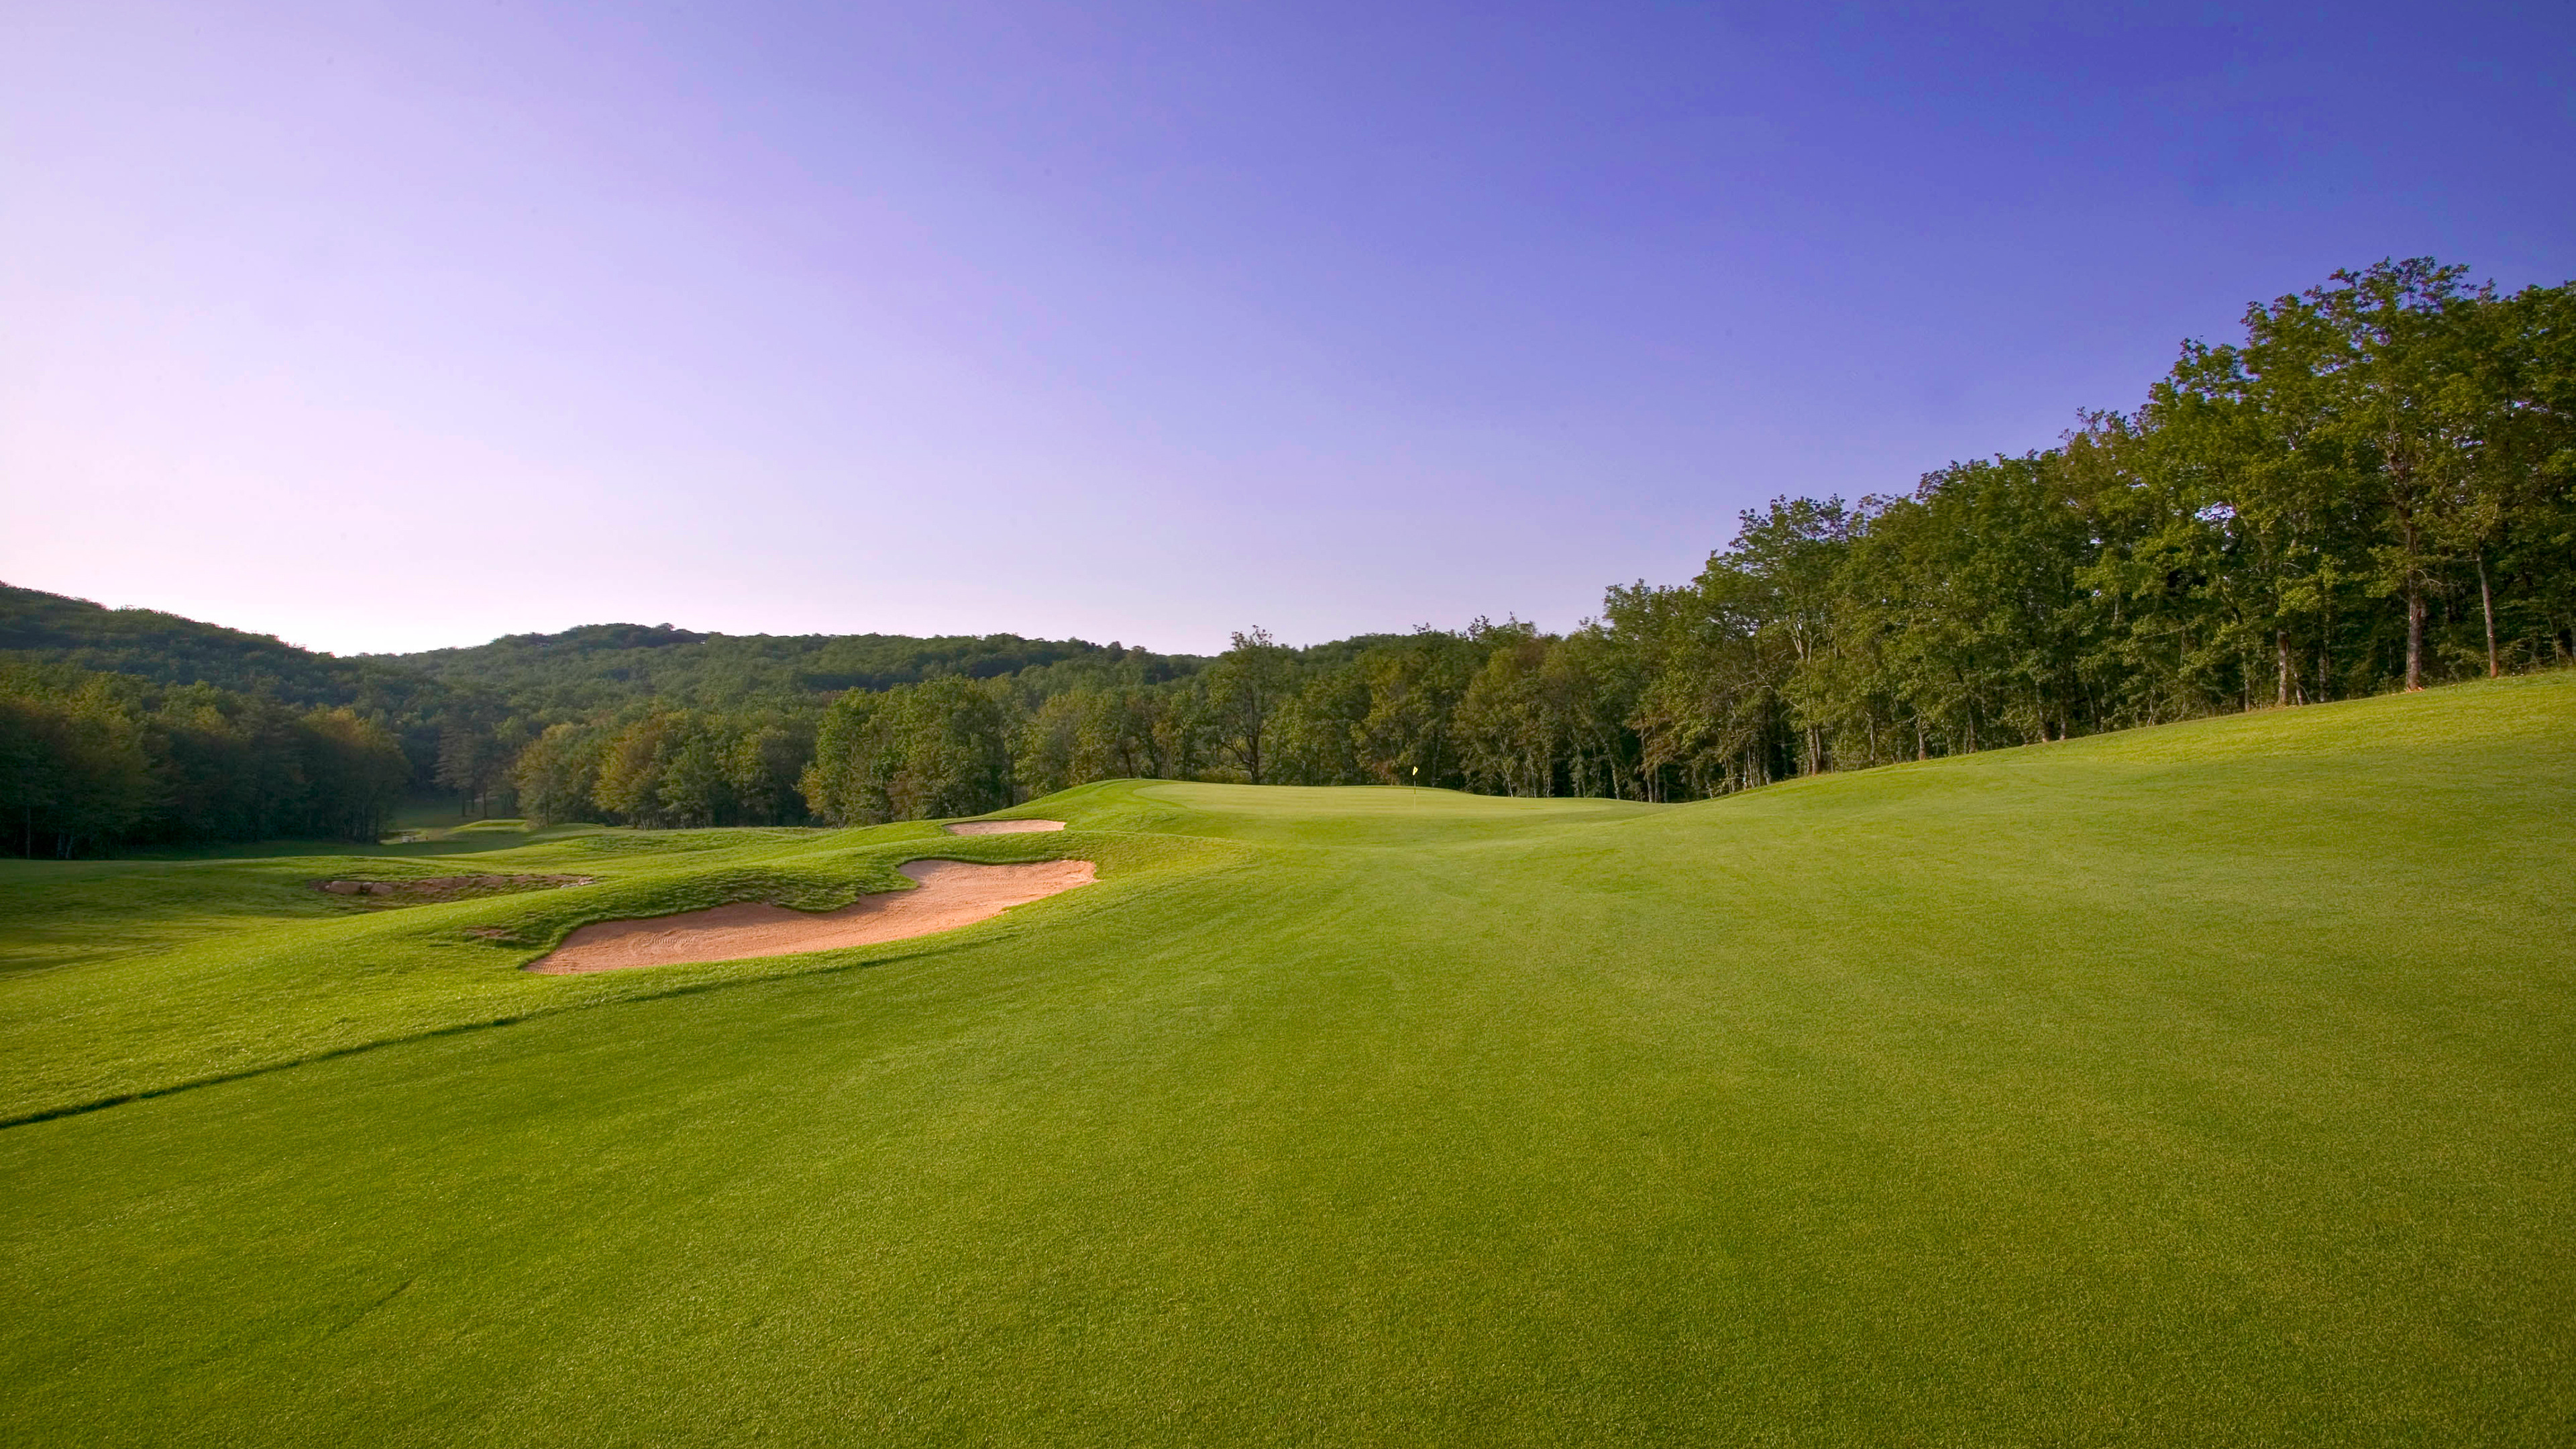 Golf Course: Souillac Country Club, France, A standard field with 18 holes, Natural landscape. 3840x2160 4K Wallpaper.